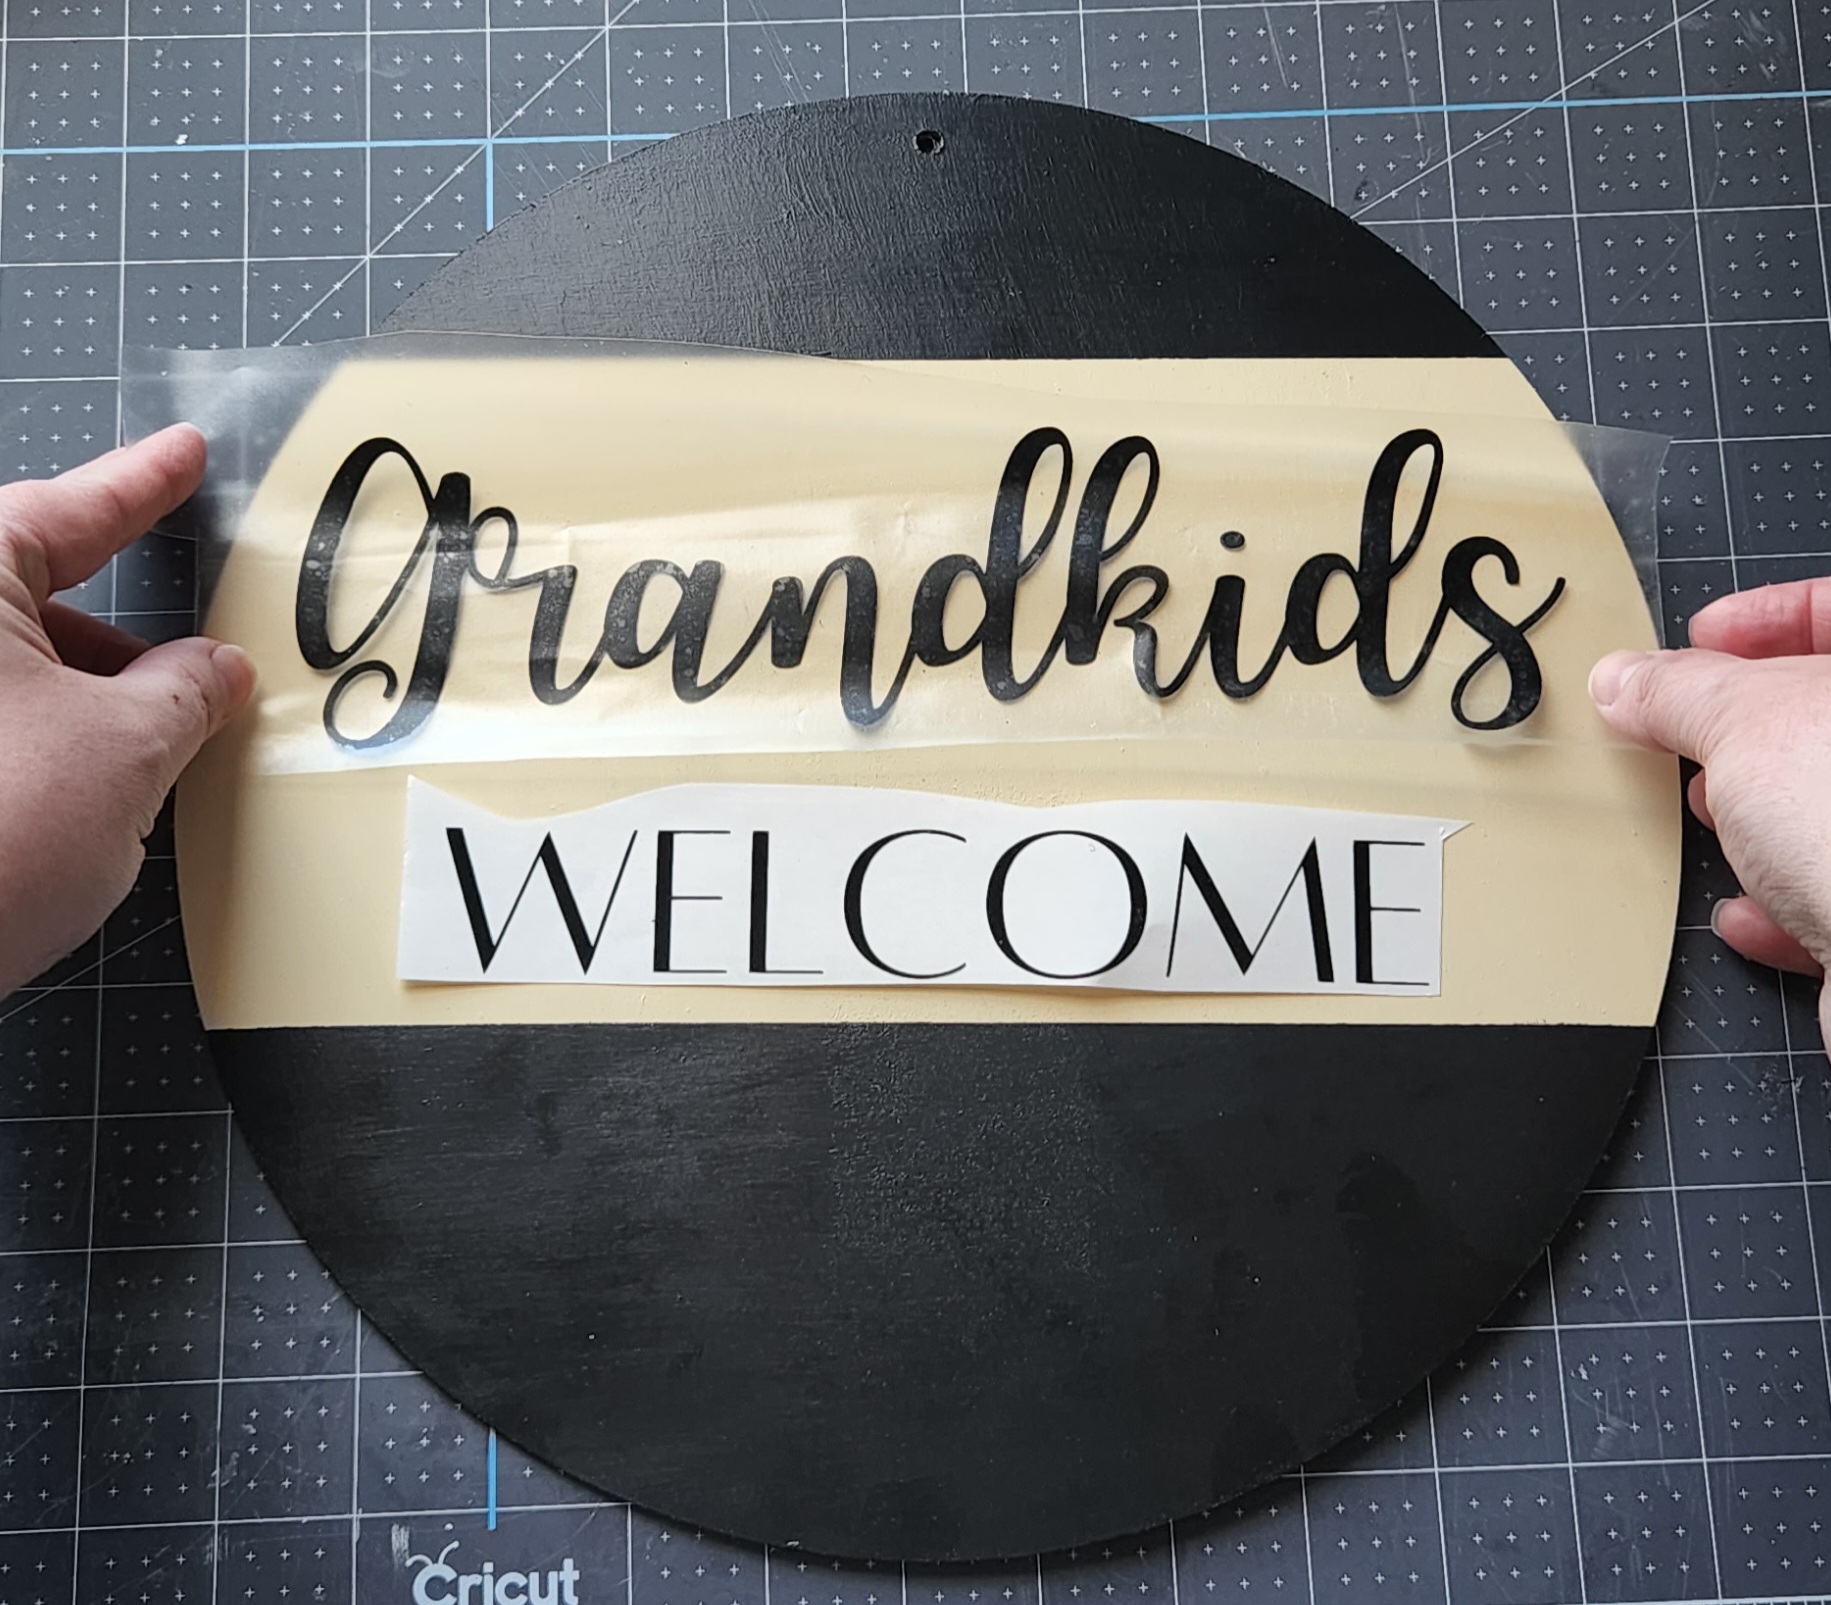 Placing "grandkids" cut in black vinyl on the Mother's Day sign.